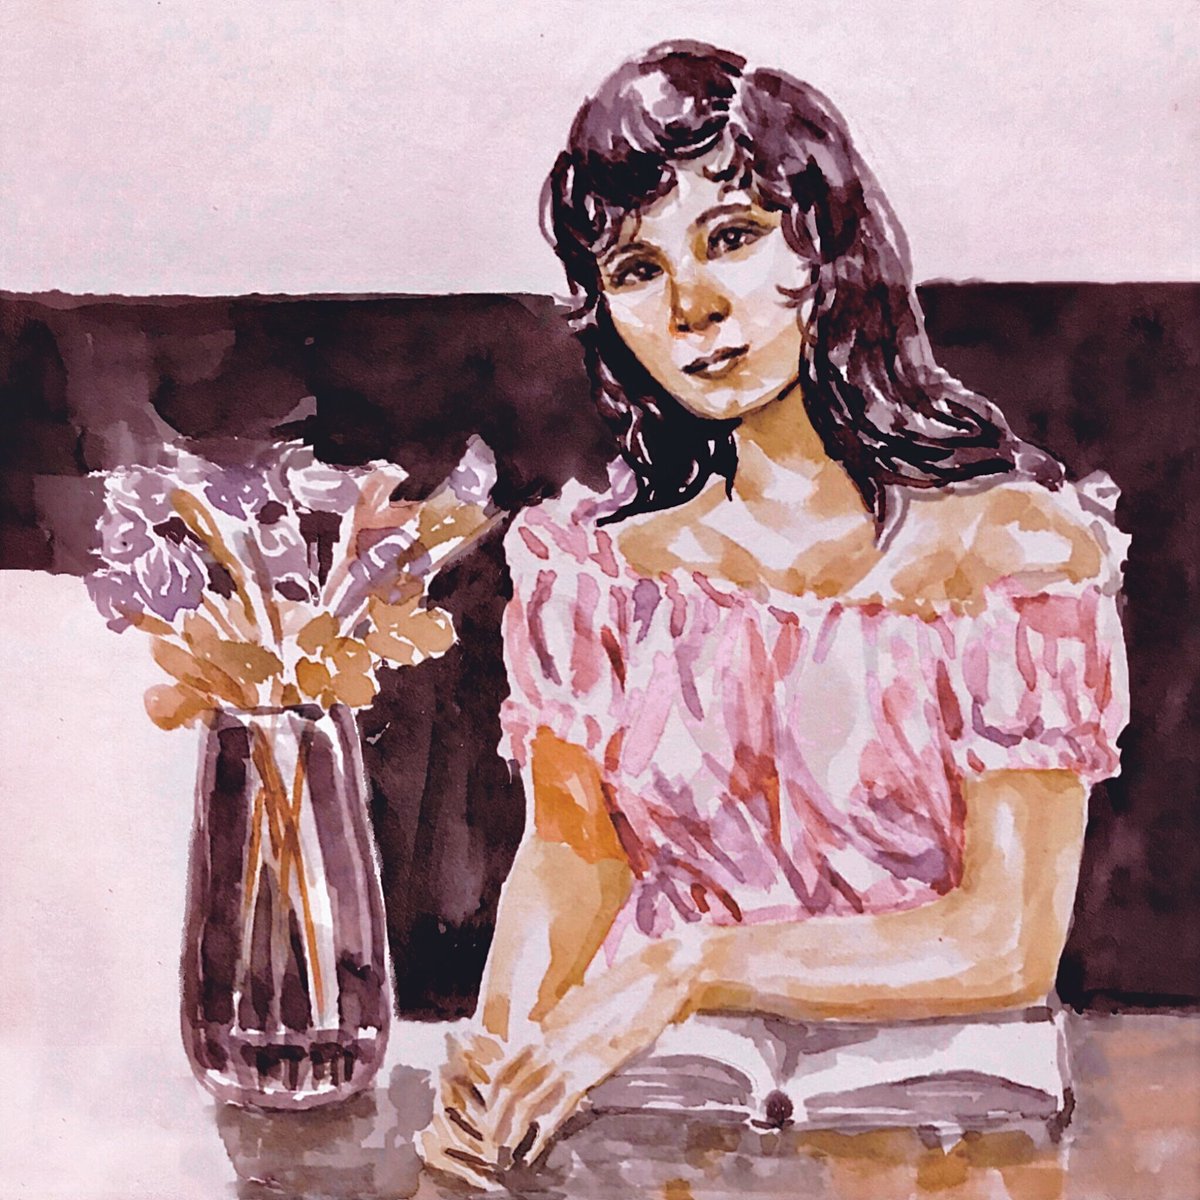 1980s Viet lady, in nightgown (Covered from Tran Chau's work)

12th March 2023

#aquarelle #artoftheday #contemporaryart #oilpainting #draw #drawings #illustrator #paint #paintings #watercolorblog #watercolordaily #watercolordrawing #illustration #watercolorpaint #portrait